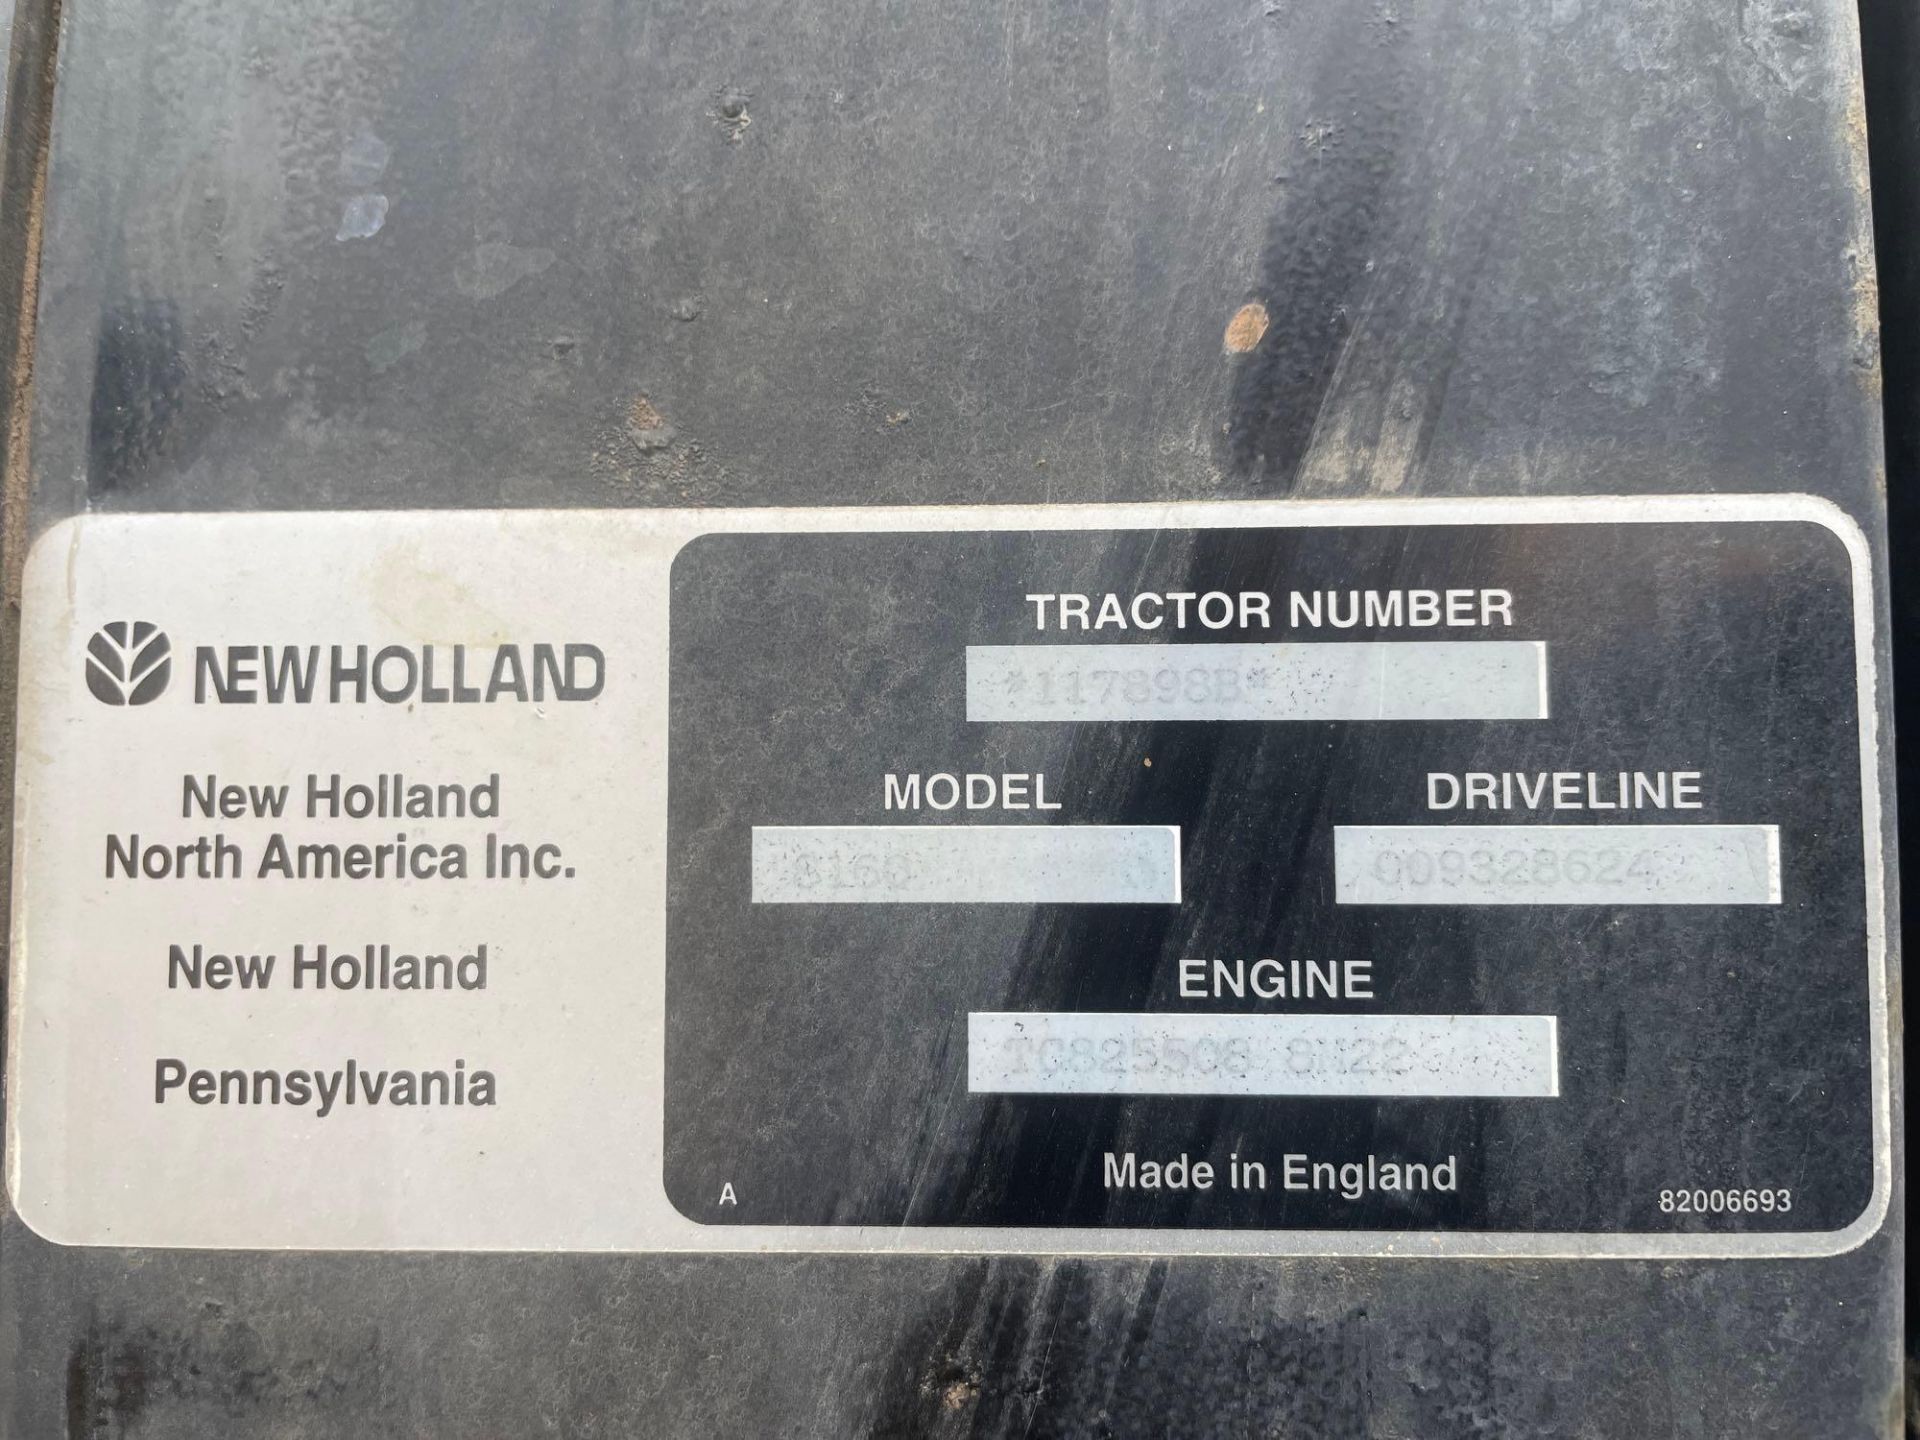 1999 New Holland 8160 Tractor - Image 12 of 19